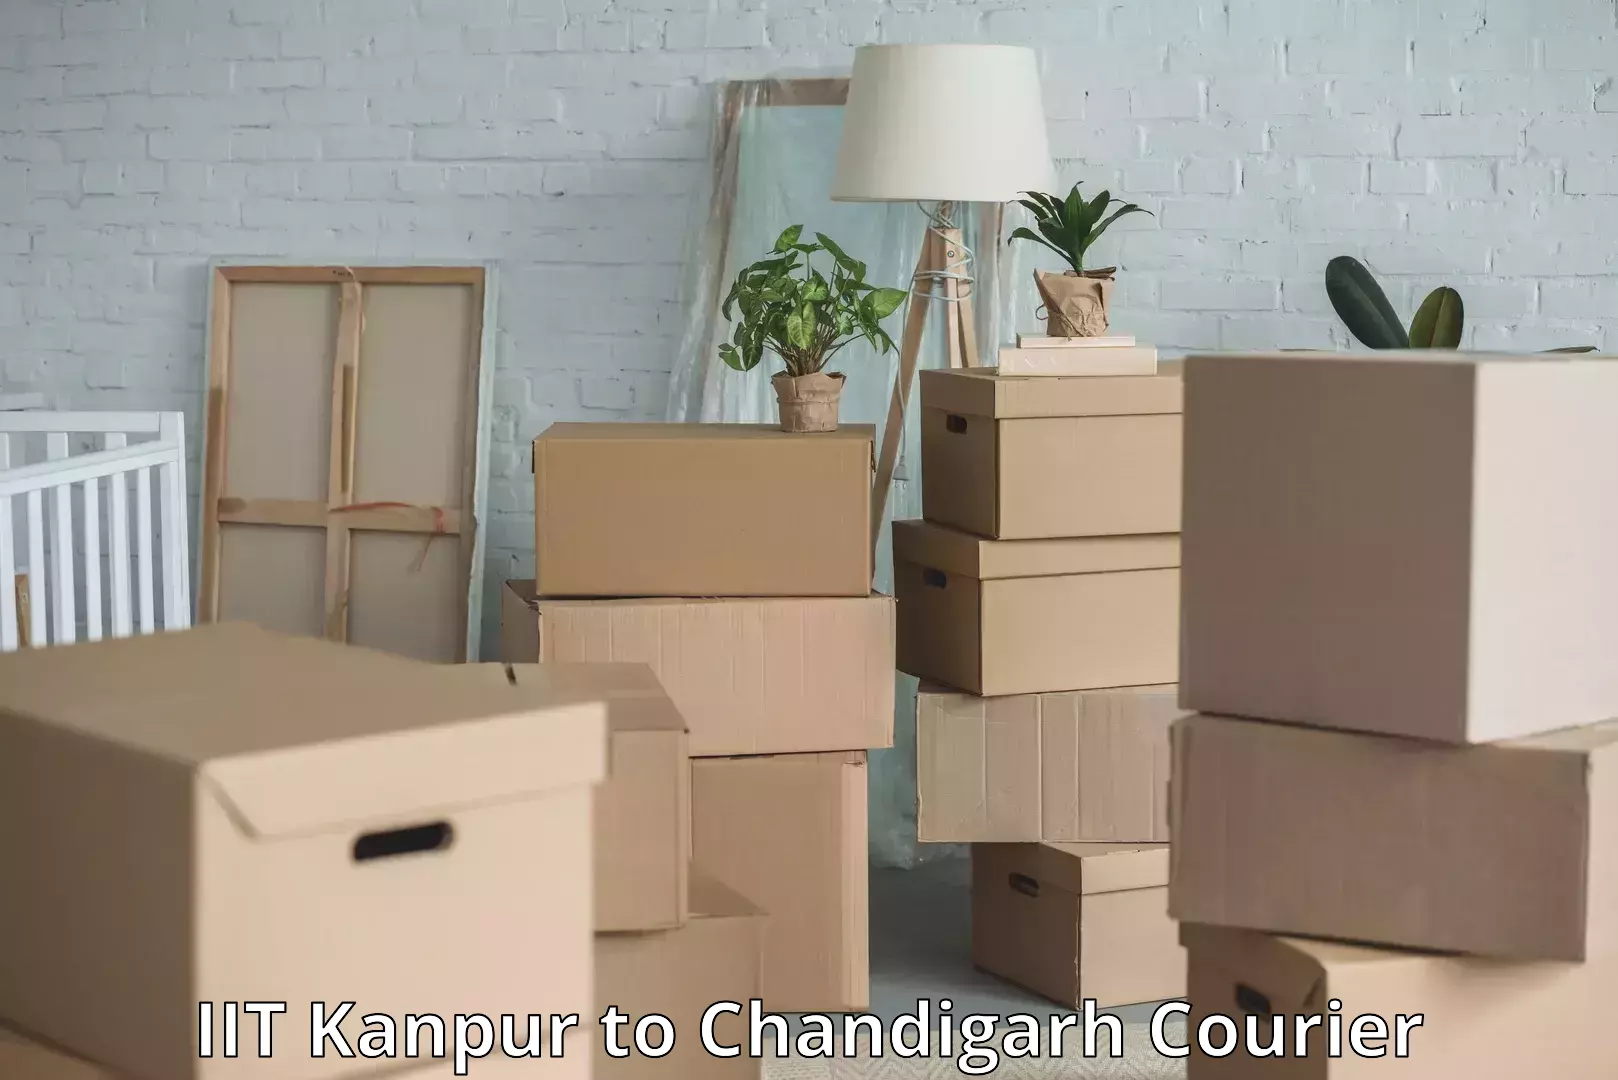 Baggage relocation service IIT Kanpur to Chandigarh